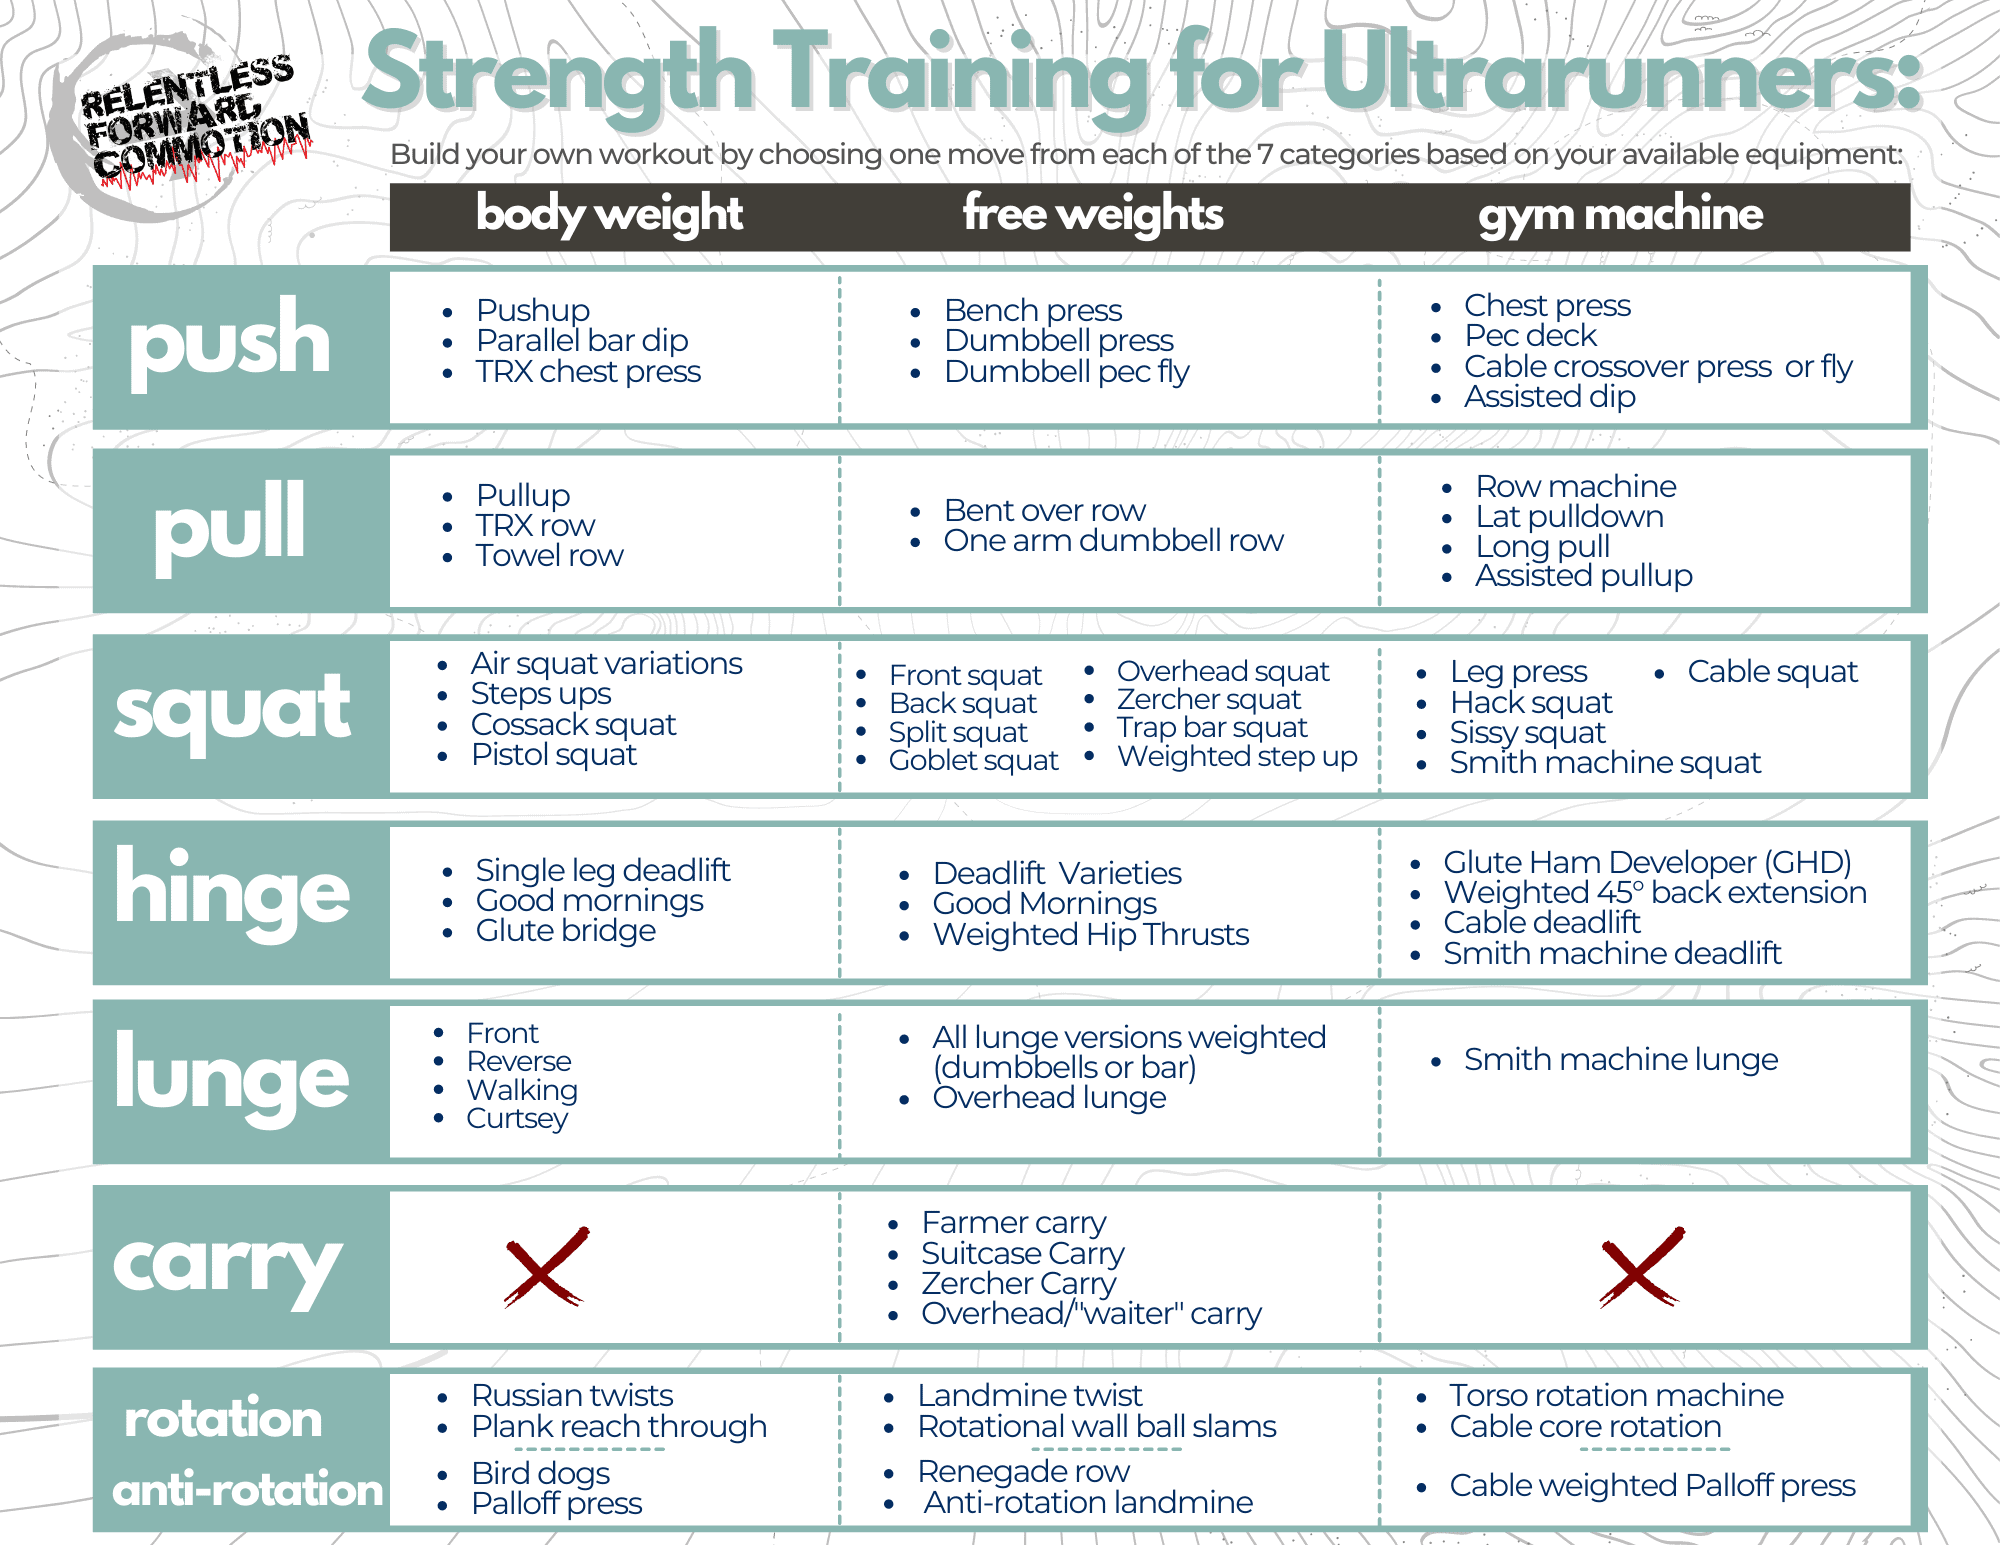 Simplifying Strength Training for Ultrarunners: 7 Moves to Balance